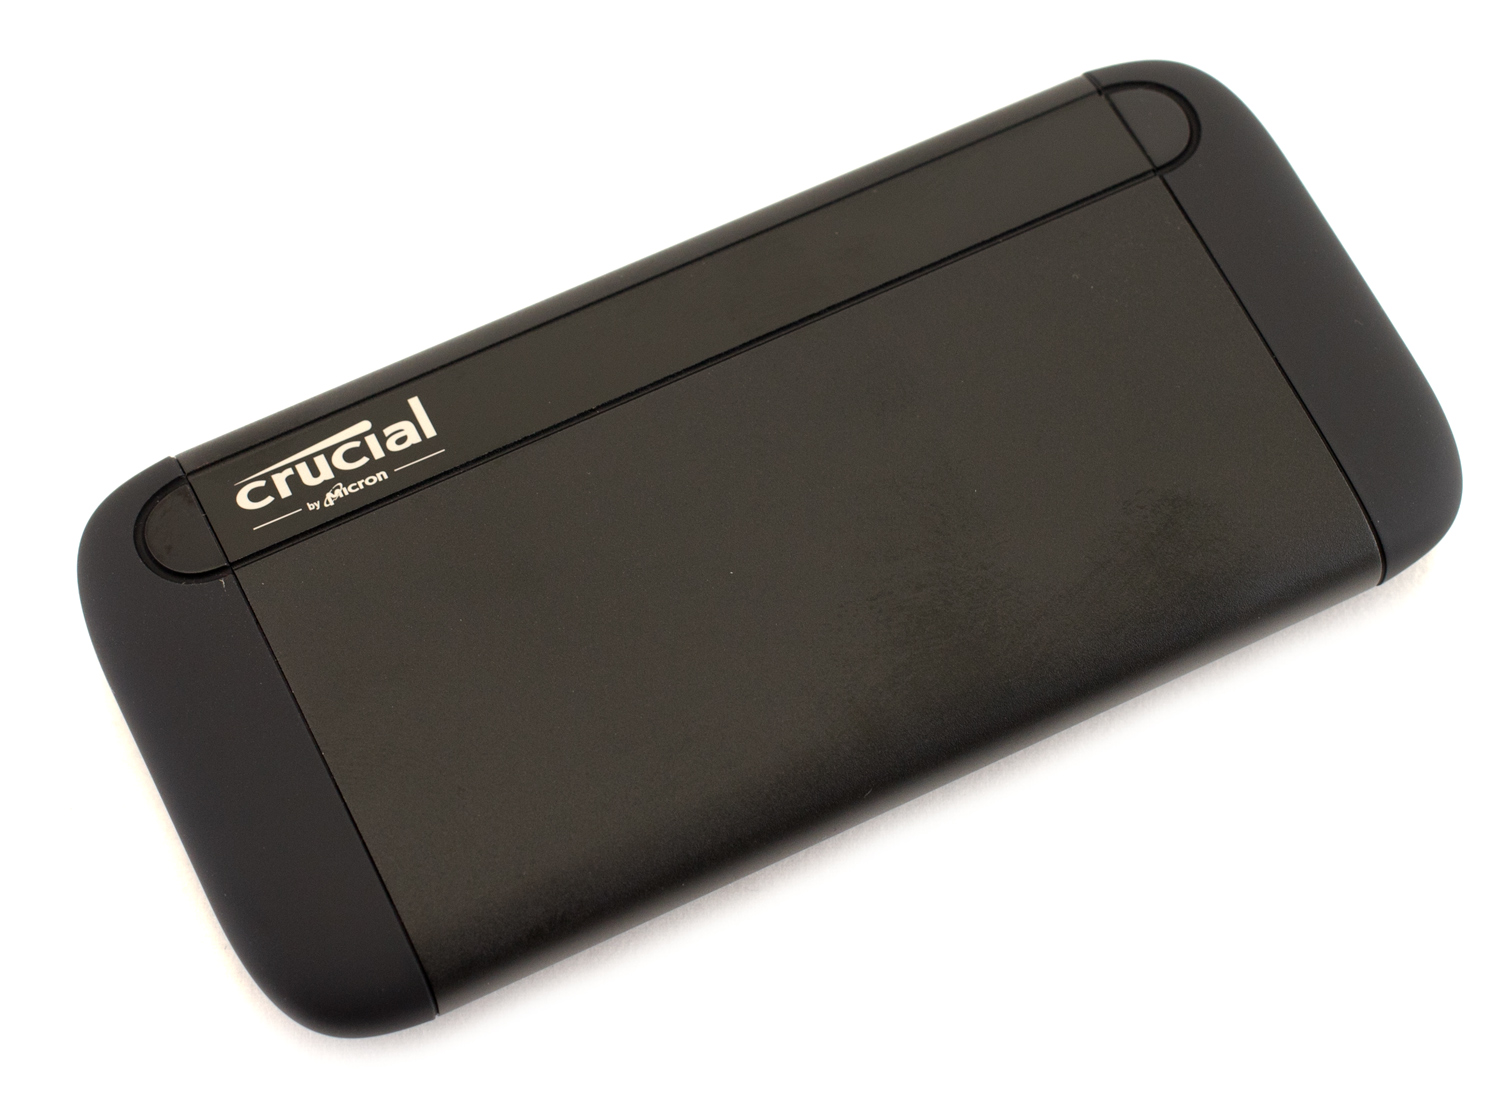 Crucial X8 Portable SSD Review - StorageReview.com